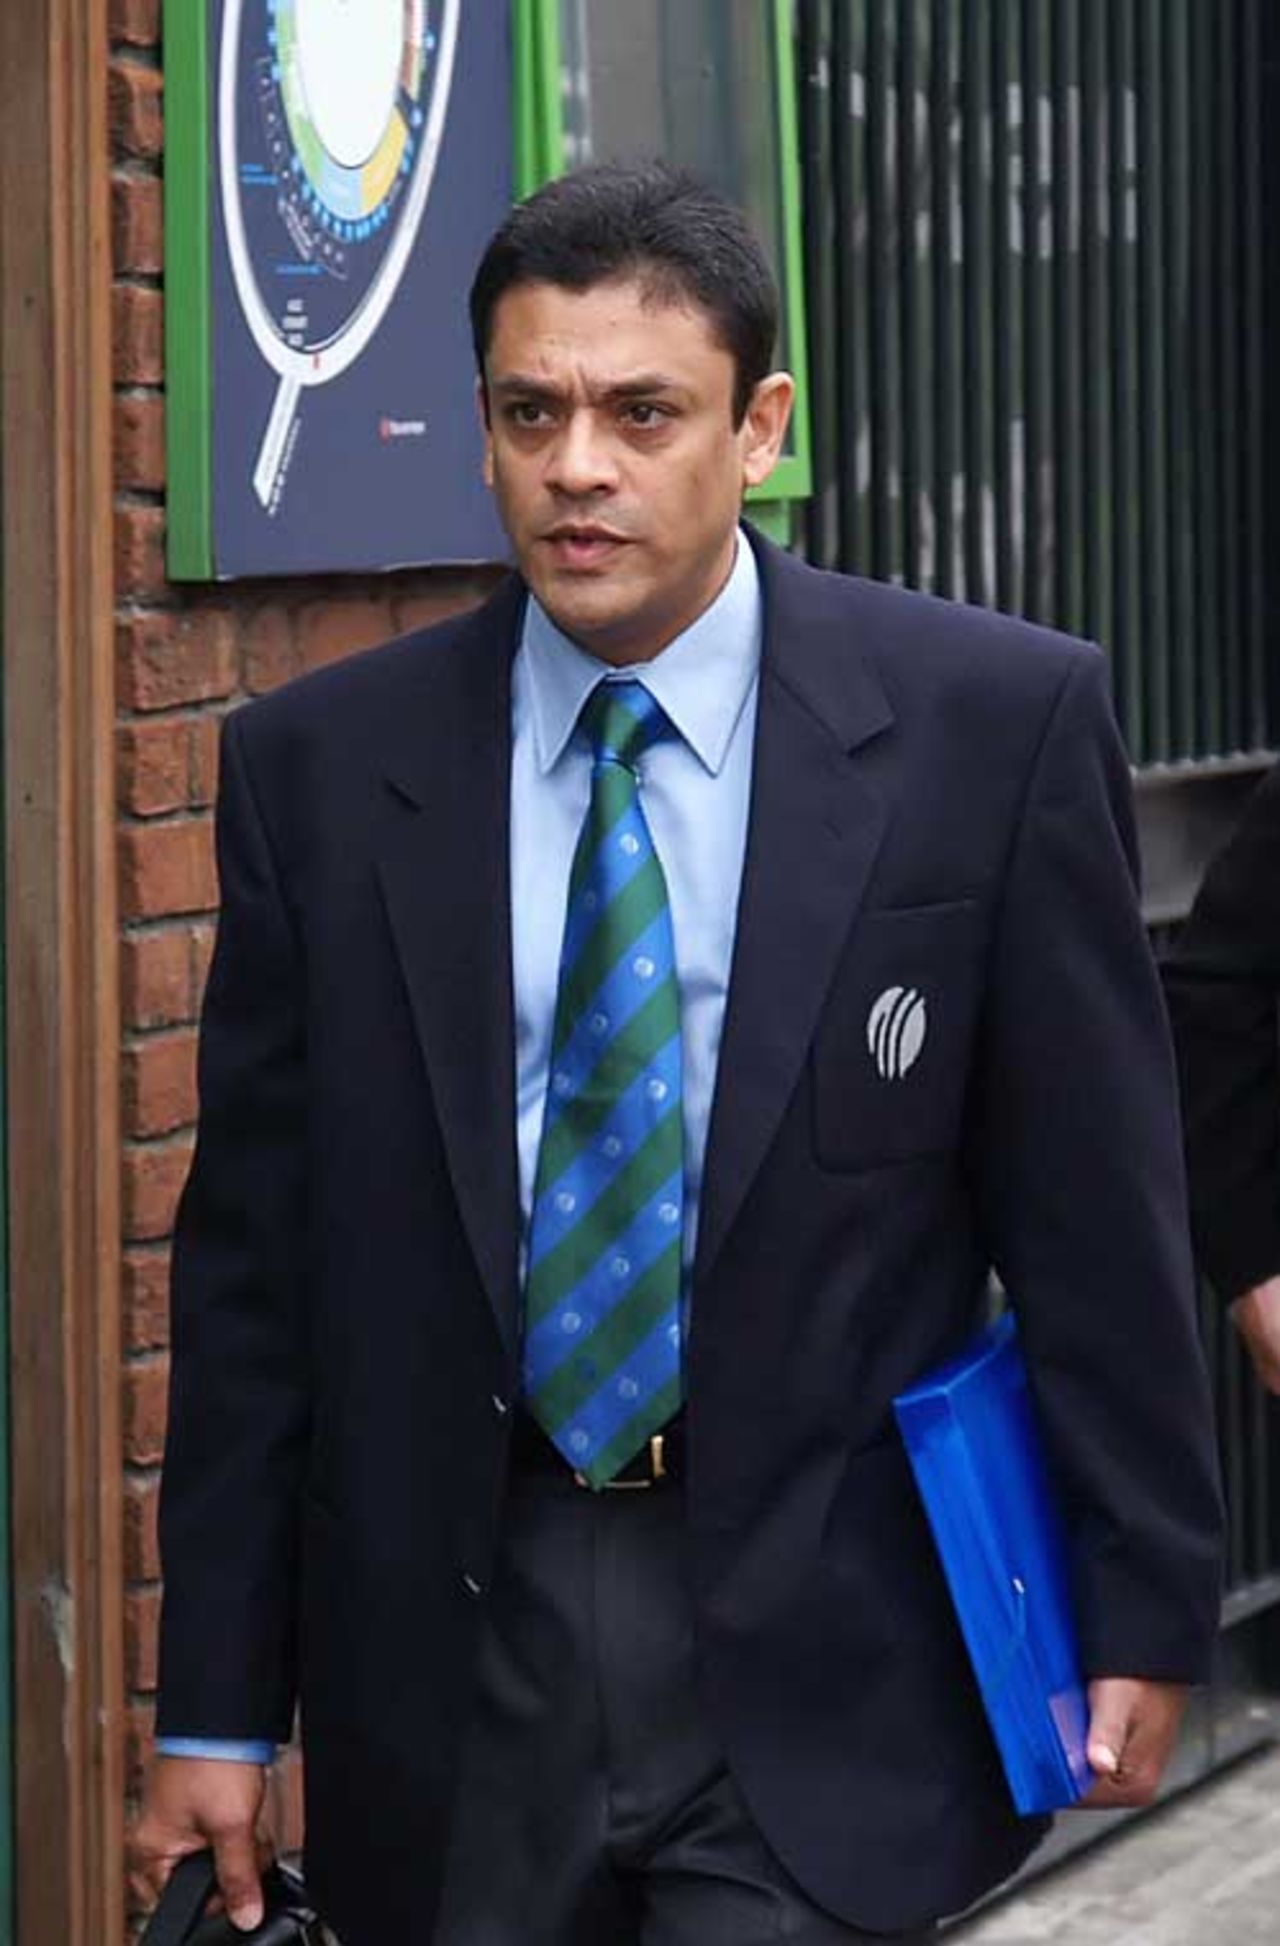 Ranjan Madugalle arrives for the ICC hearing involving Inzamam-ul-Haq, The Oval, September 27, 2006